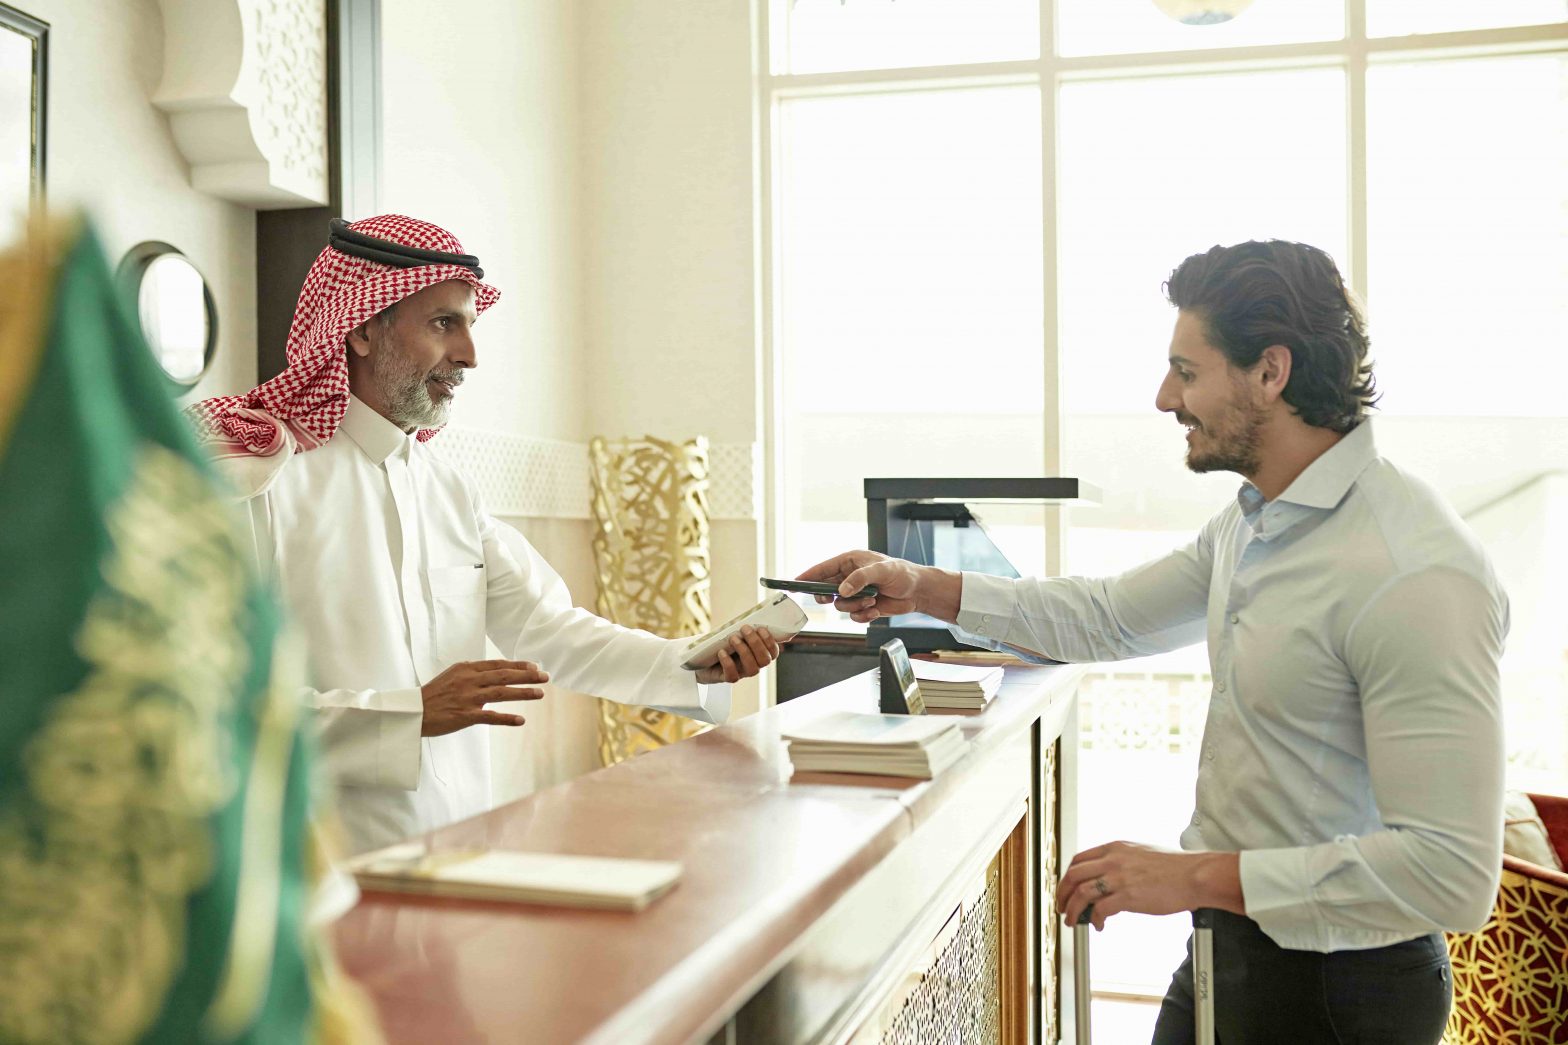 KSA retail worker interacting with a customer after being empowered by retail training